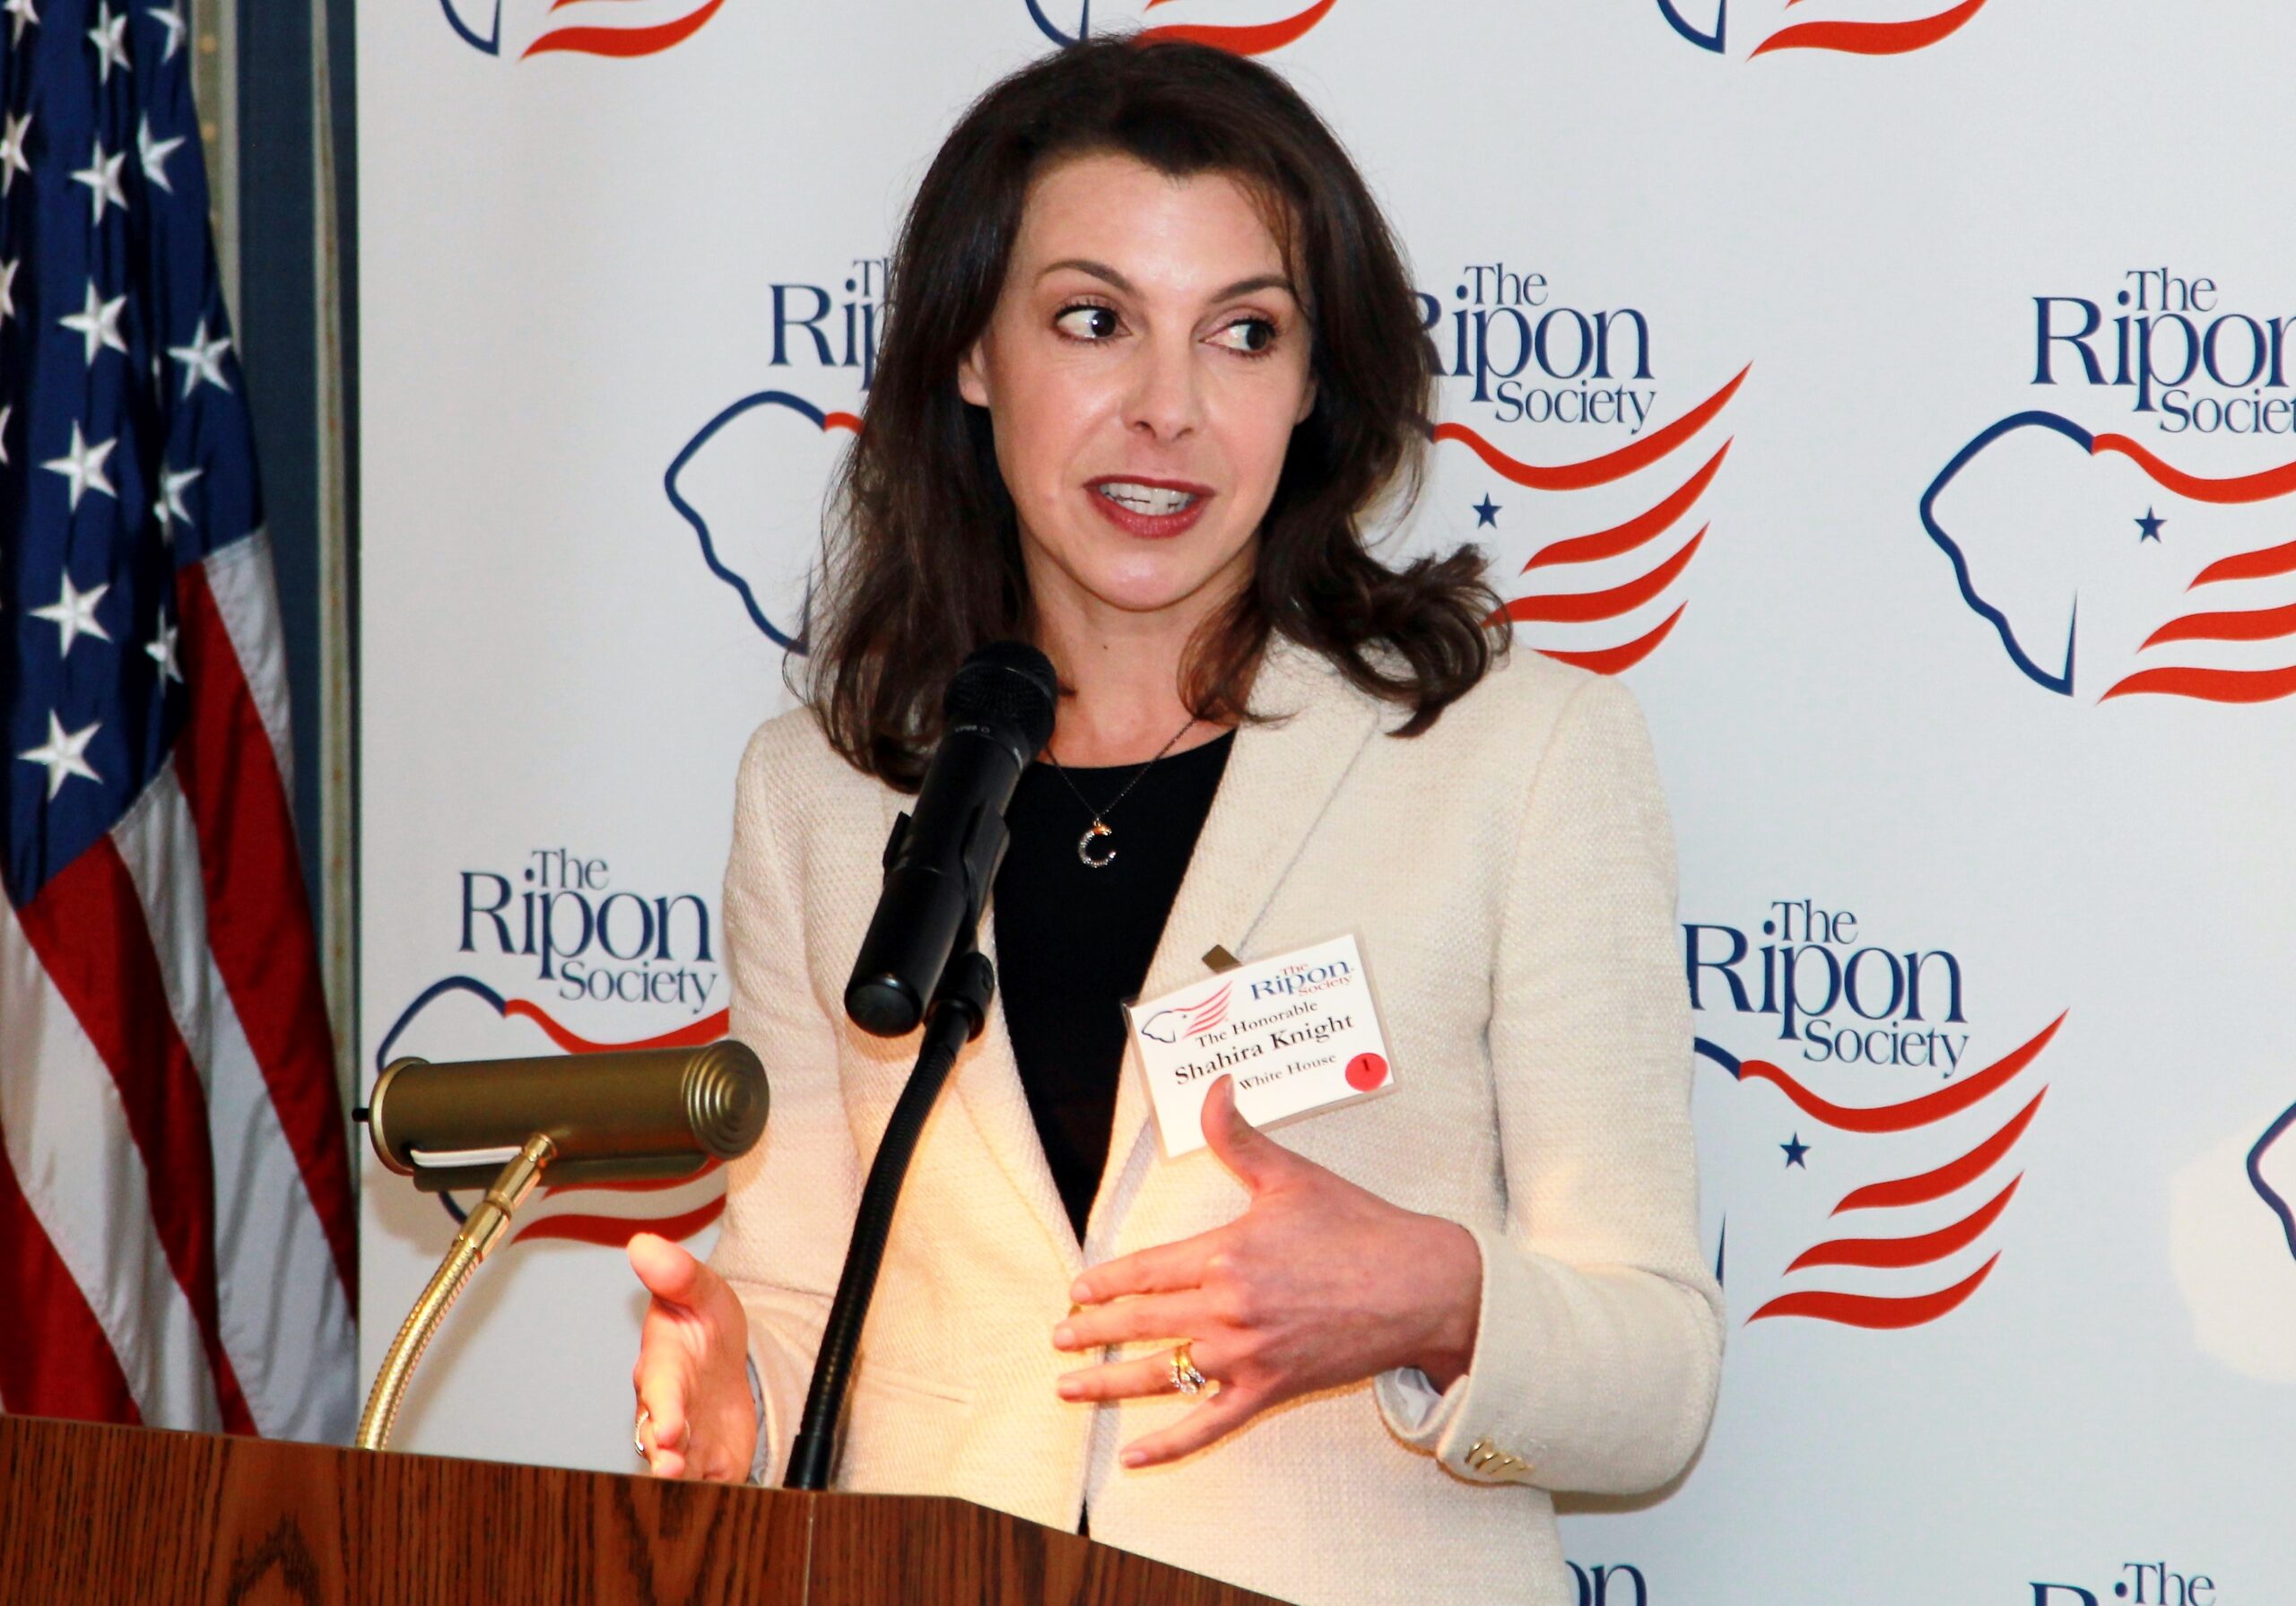 Ripon Society Holds Luncheon Discussion with White House Legislative Affairs Director Shahira Knight